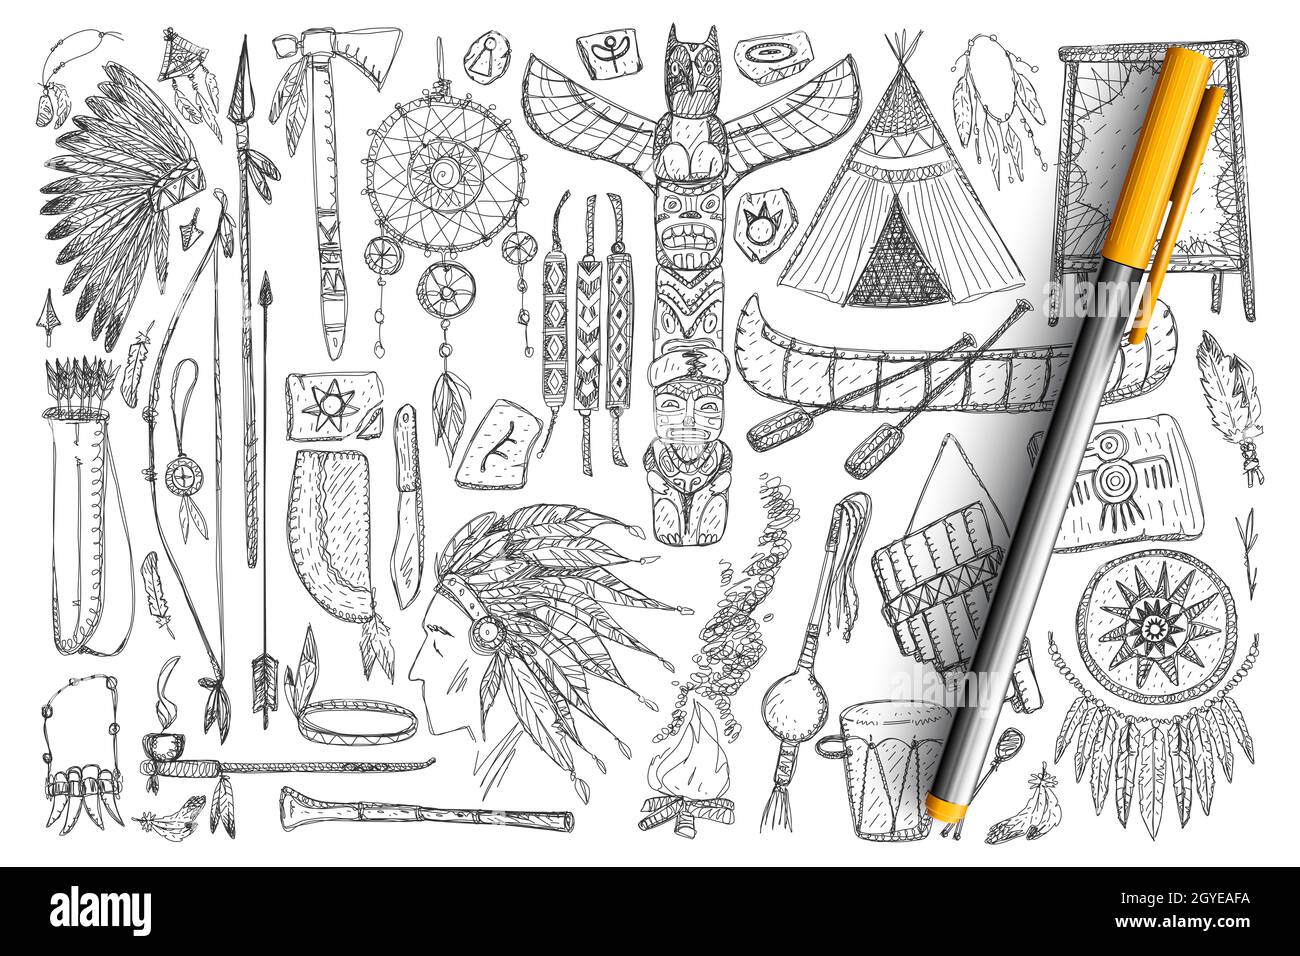 Accessories if Indians doodle set. Collection of hand drawn feathers, tools, musical instruments, boats, tools for hunting and cared symbols isolated Stock Photo